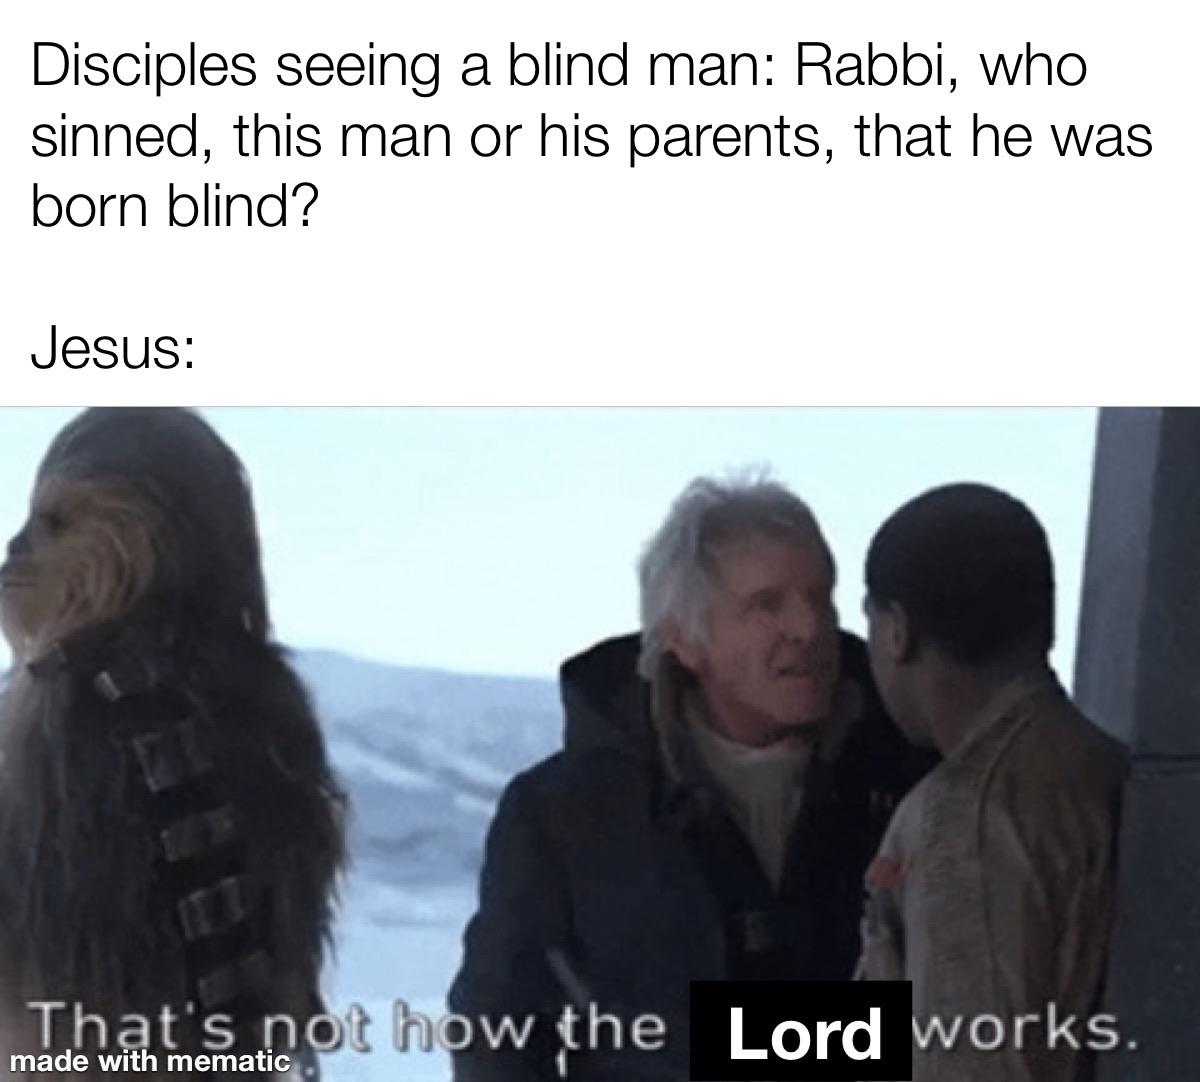 Christian, John Christian Memes Christian, John text: Disciples seeing a blind man: Rabbi, who sinned, this man or his parents, that he was born blind? Jesus: That's n made With mematica. w $he Lord orks. 